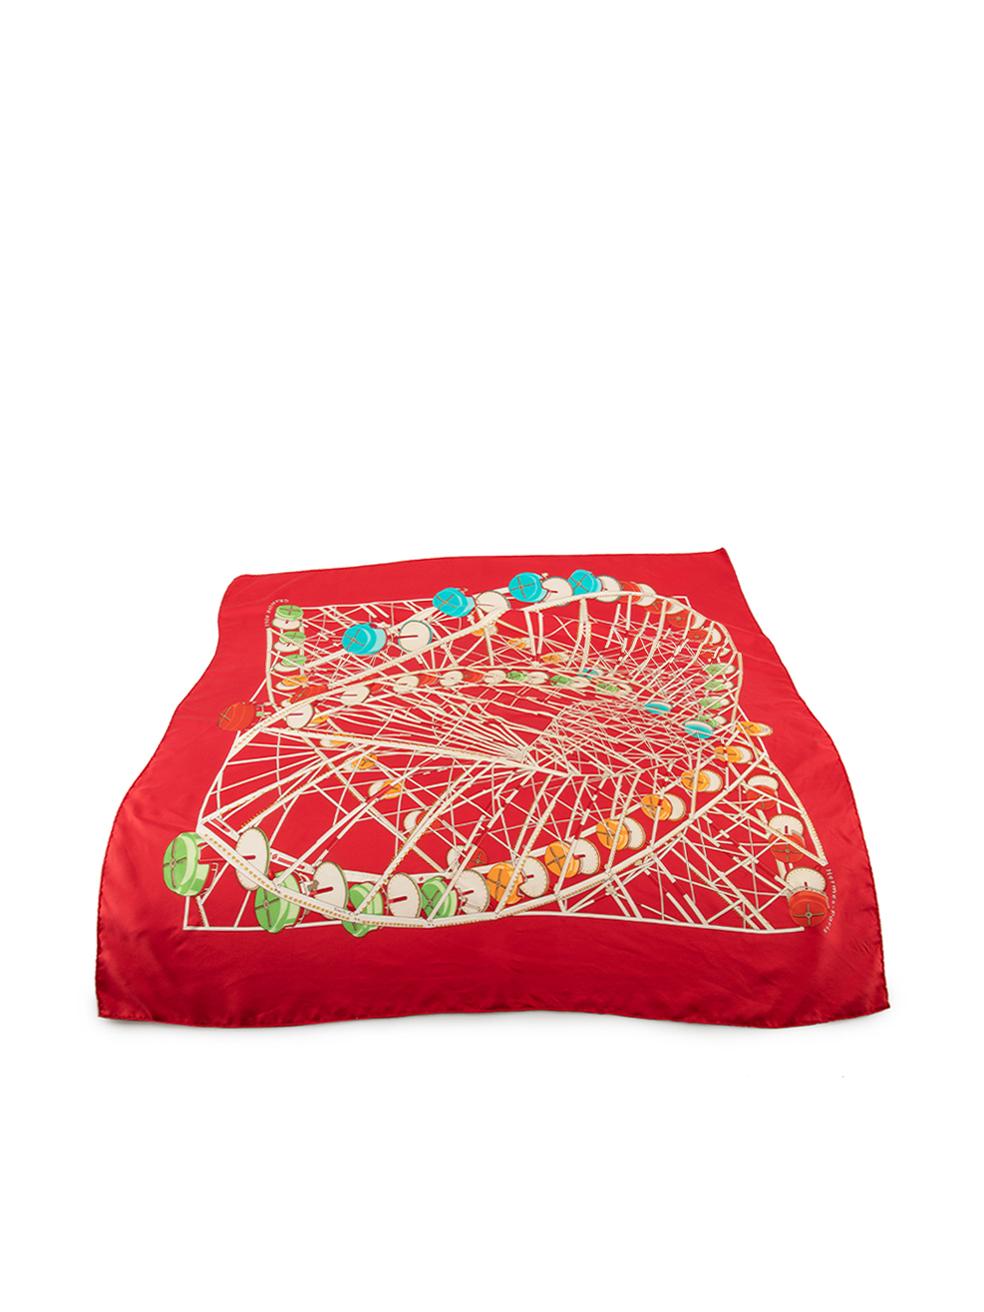 CONDITION is Very good. Minimal wear to scarf is evident. Minimal wear to the silk - particularly at the borders - with discoloured marks on this used Hermès designer resale item. This item comes with original box.



Details


Red

Silk

Square